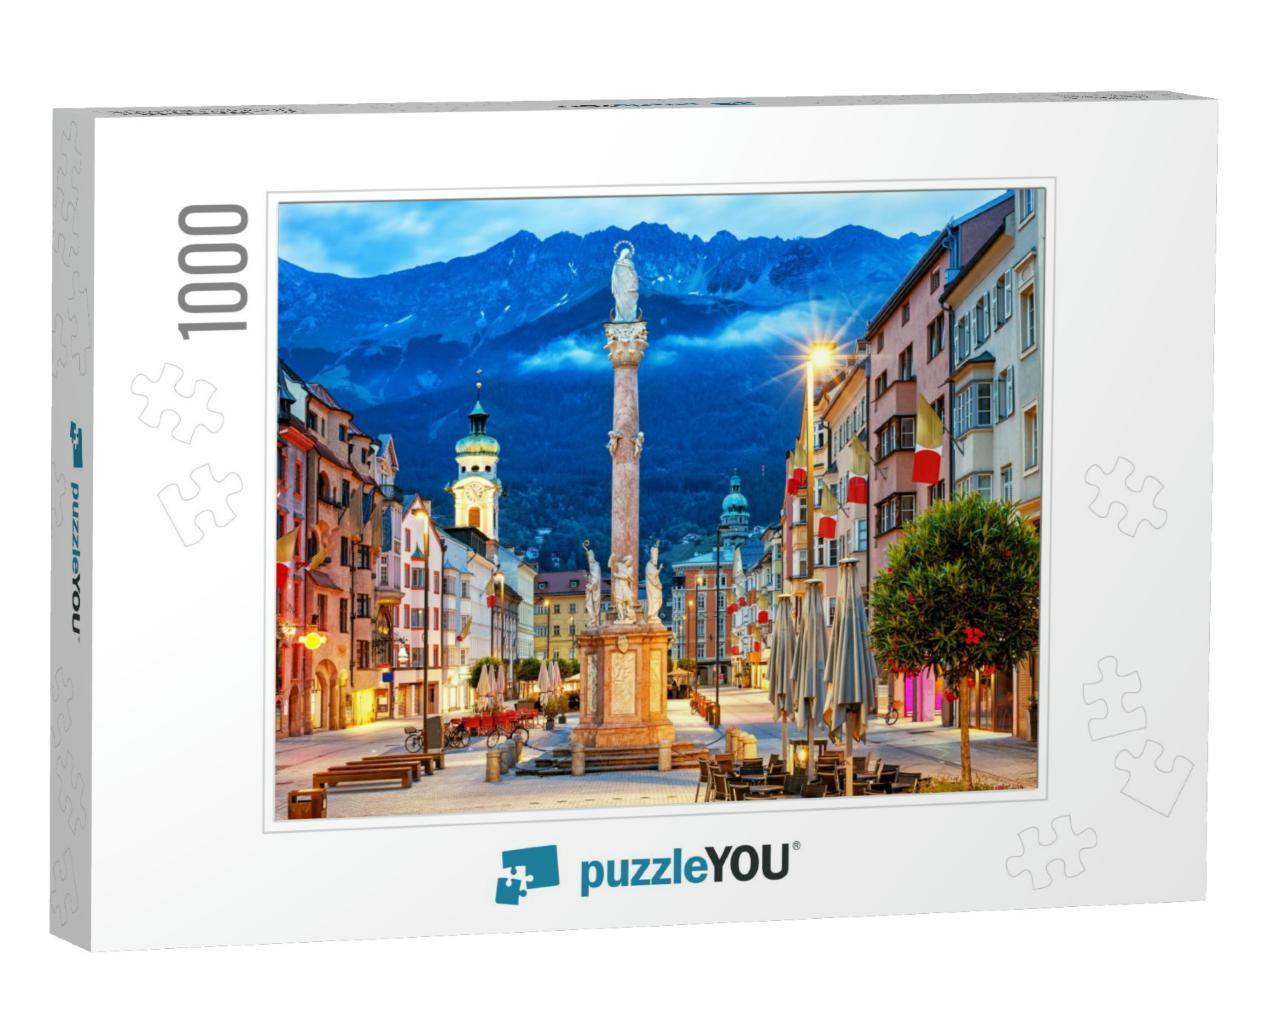 Innsbruck Old Town in Alps Mountains, Tyrol, Austria... Jigsaw Puzzle with 1000 pieces